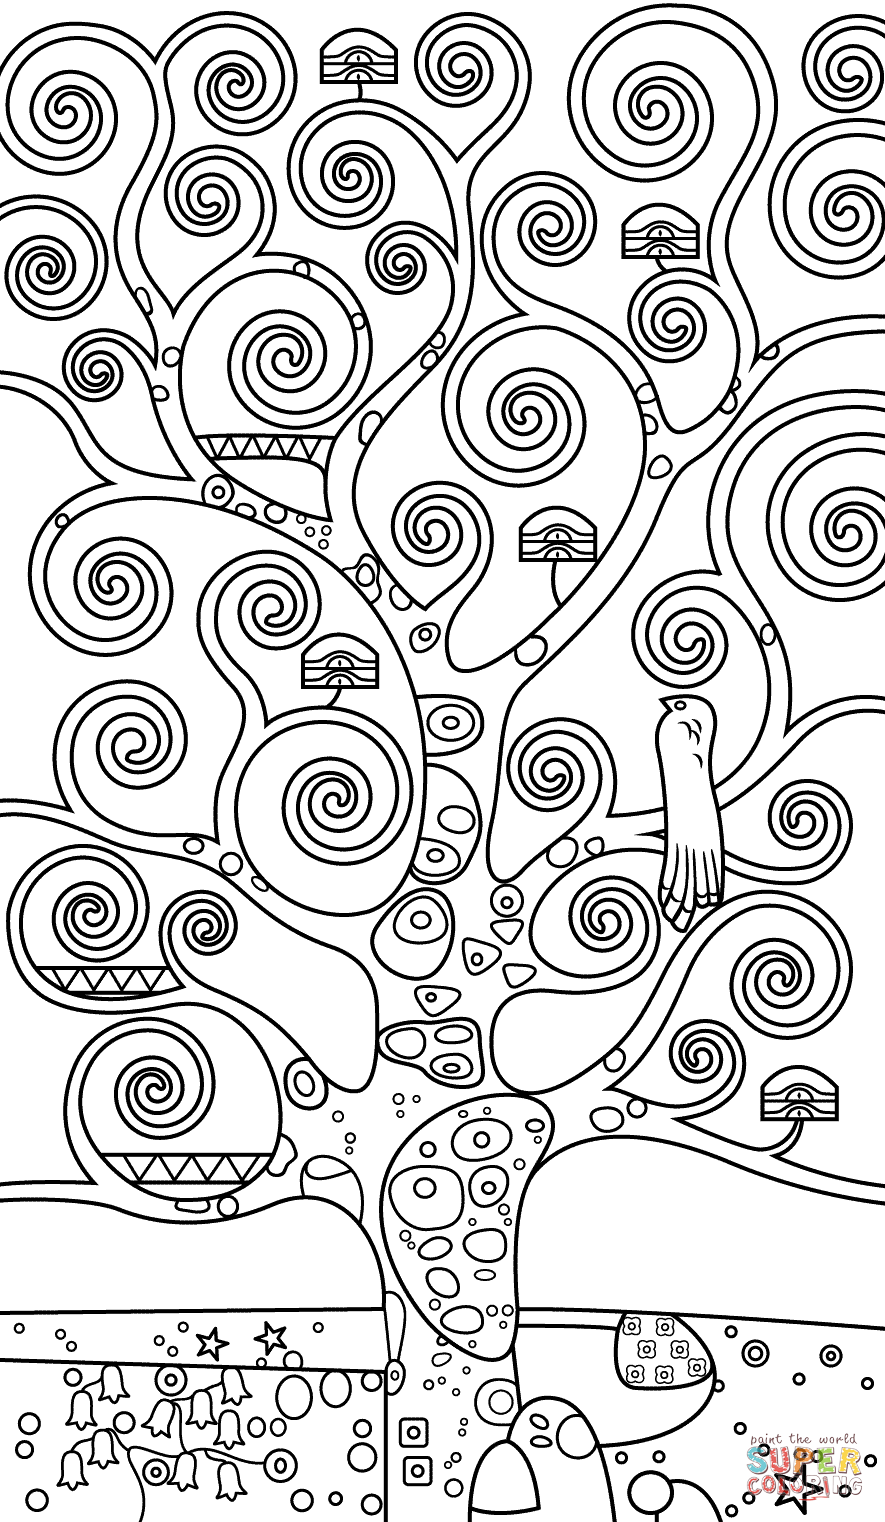 Tree of Life by Gustav Klimt coloring page | Free Printable